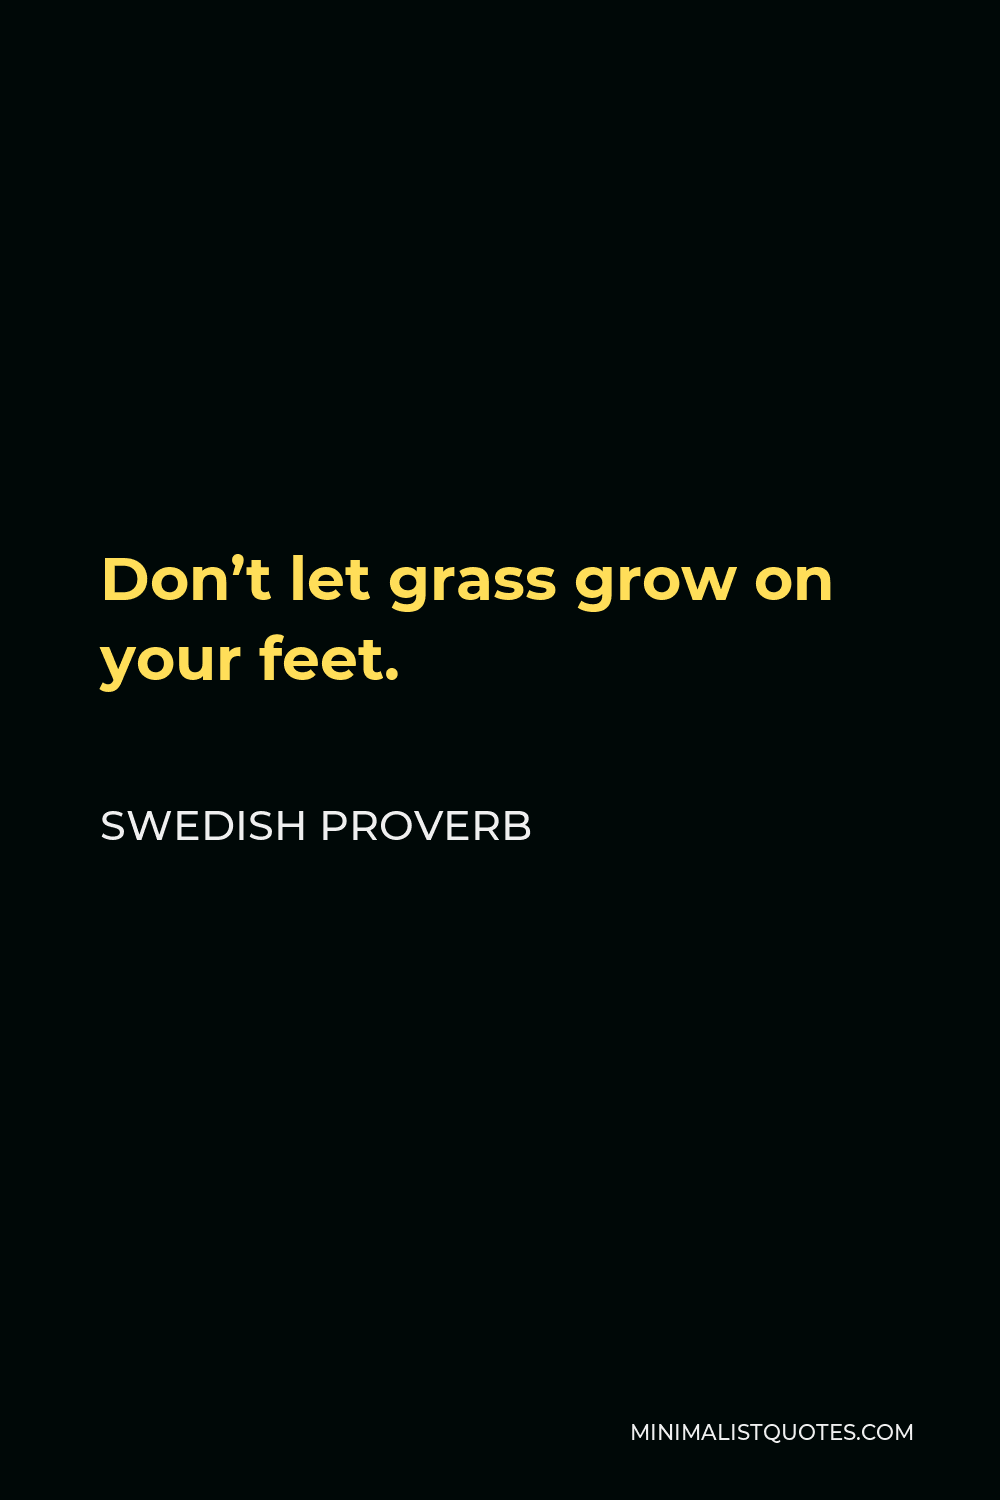 Swedish Proverb Quote - Don’t let grass grow on your feet.